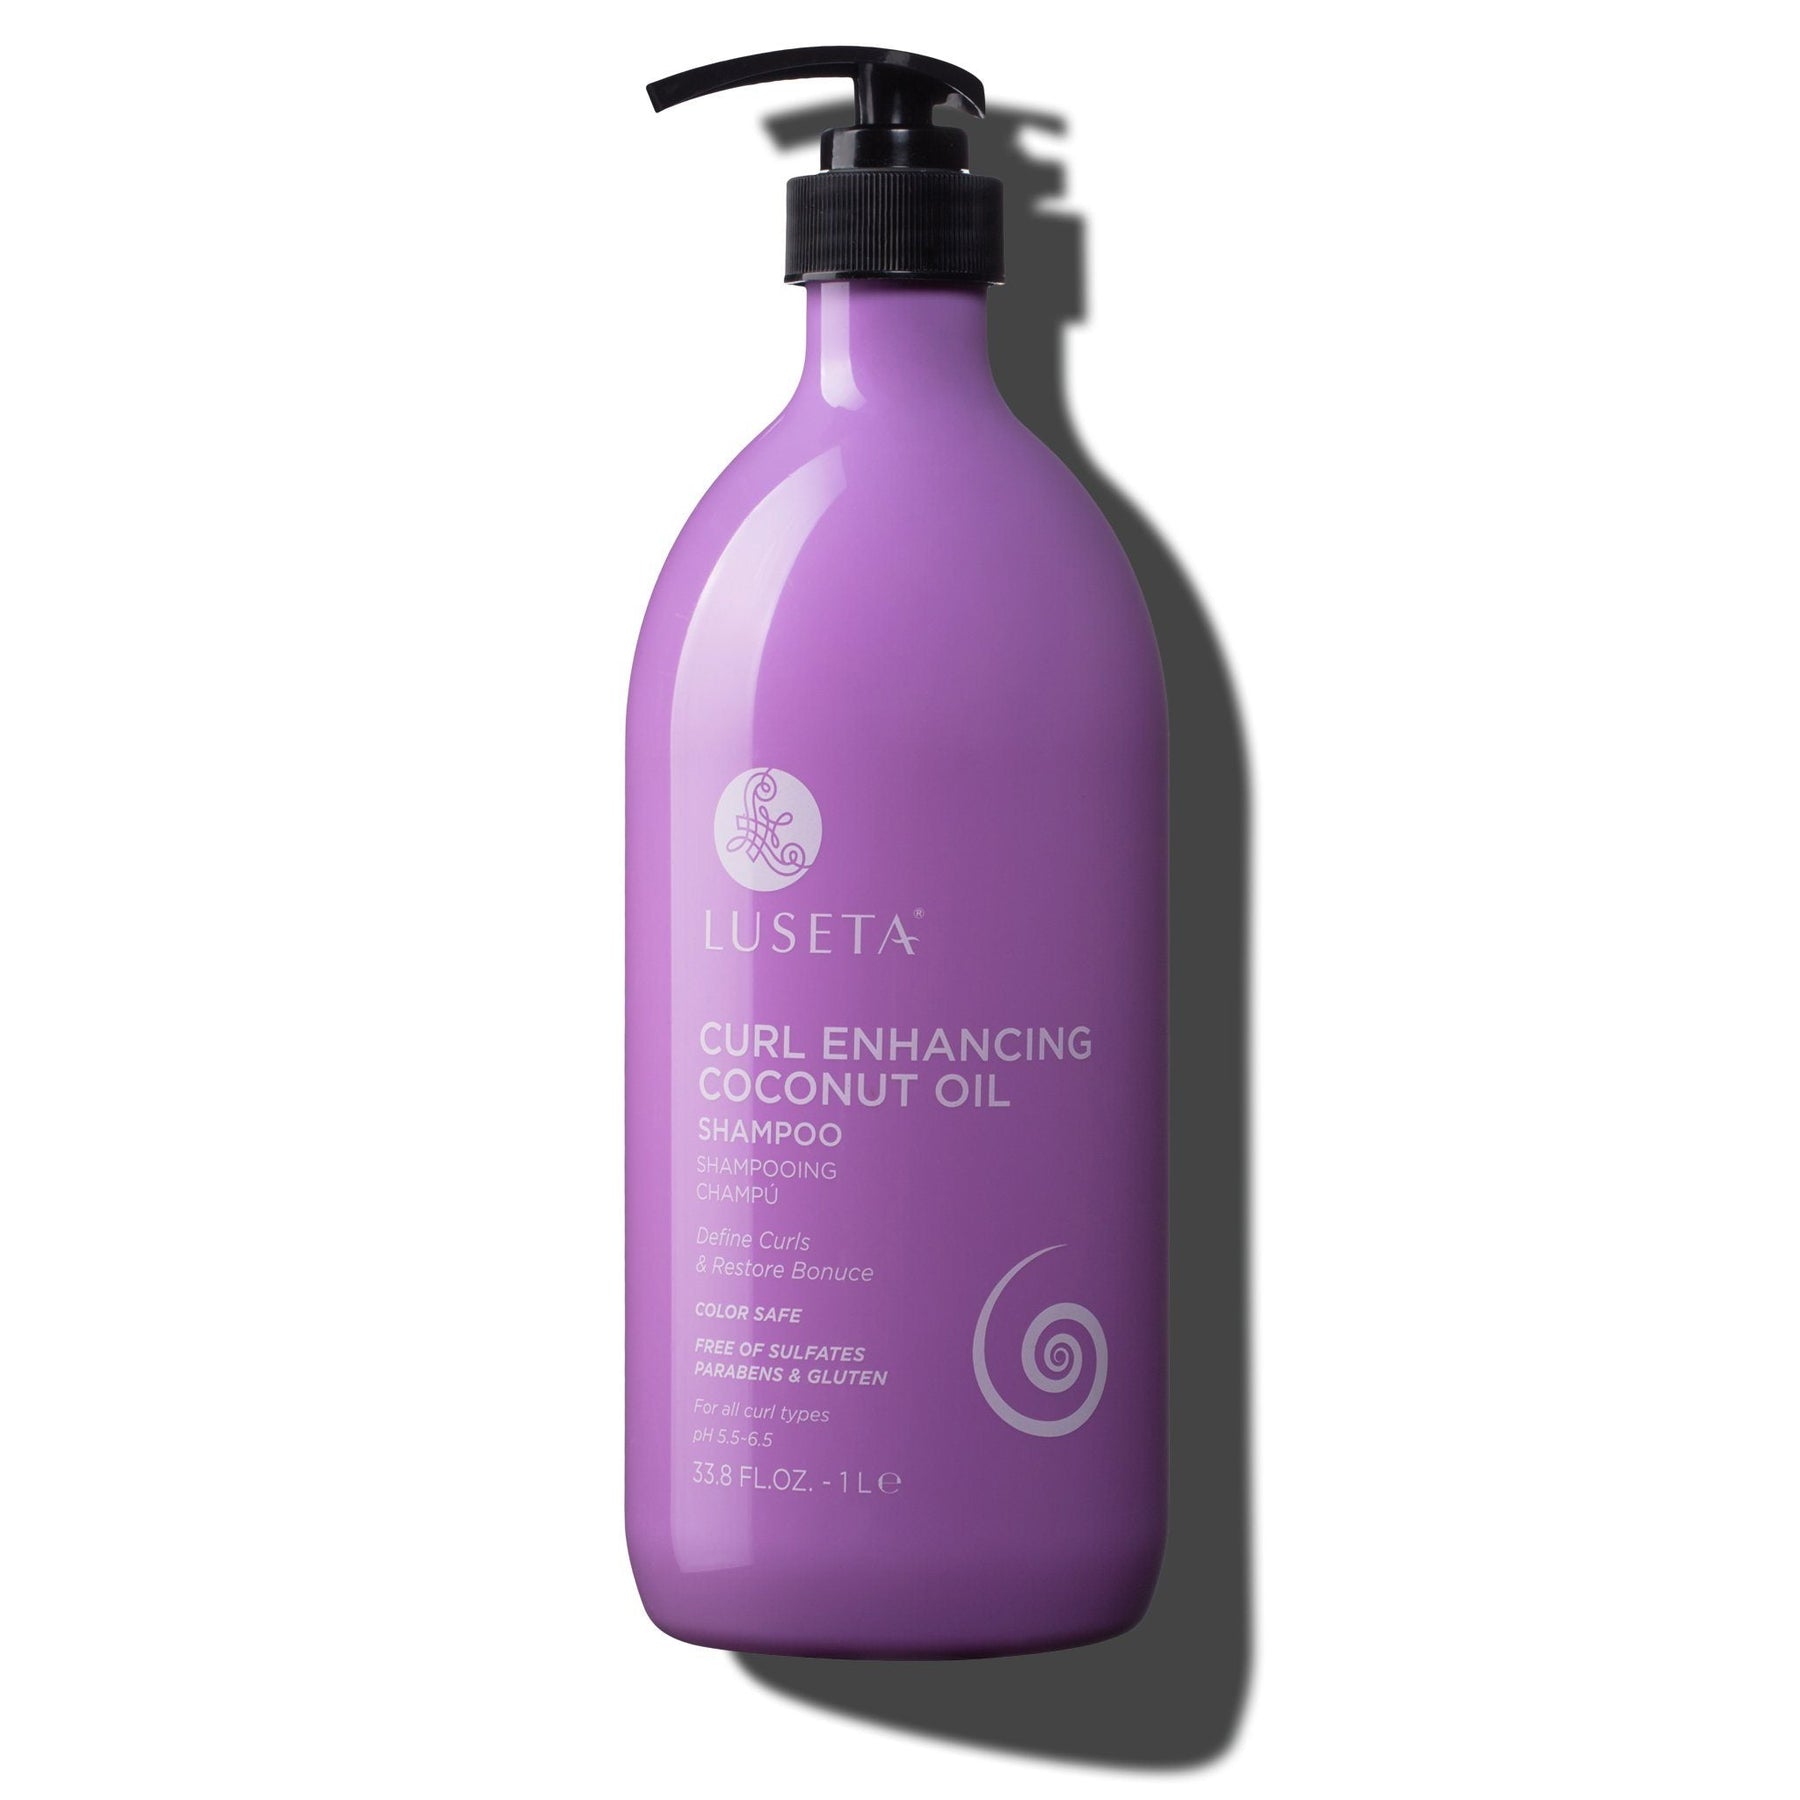 Curl Enhancing Coconut Oil Shampoo - 33.8oz - by Luseta Beauty |ProCare Outlet|